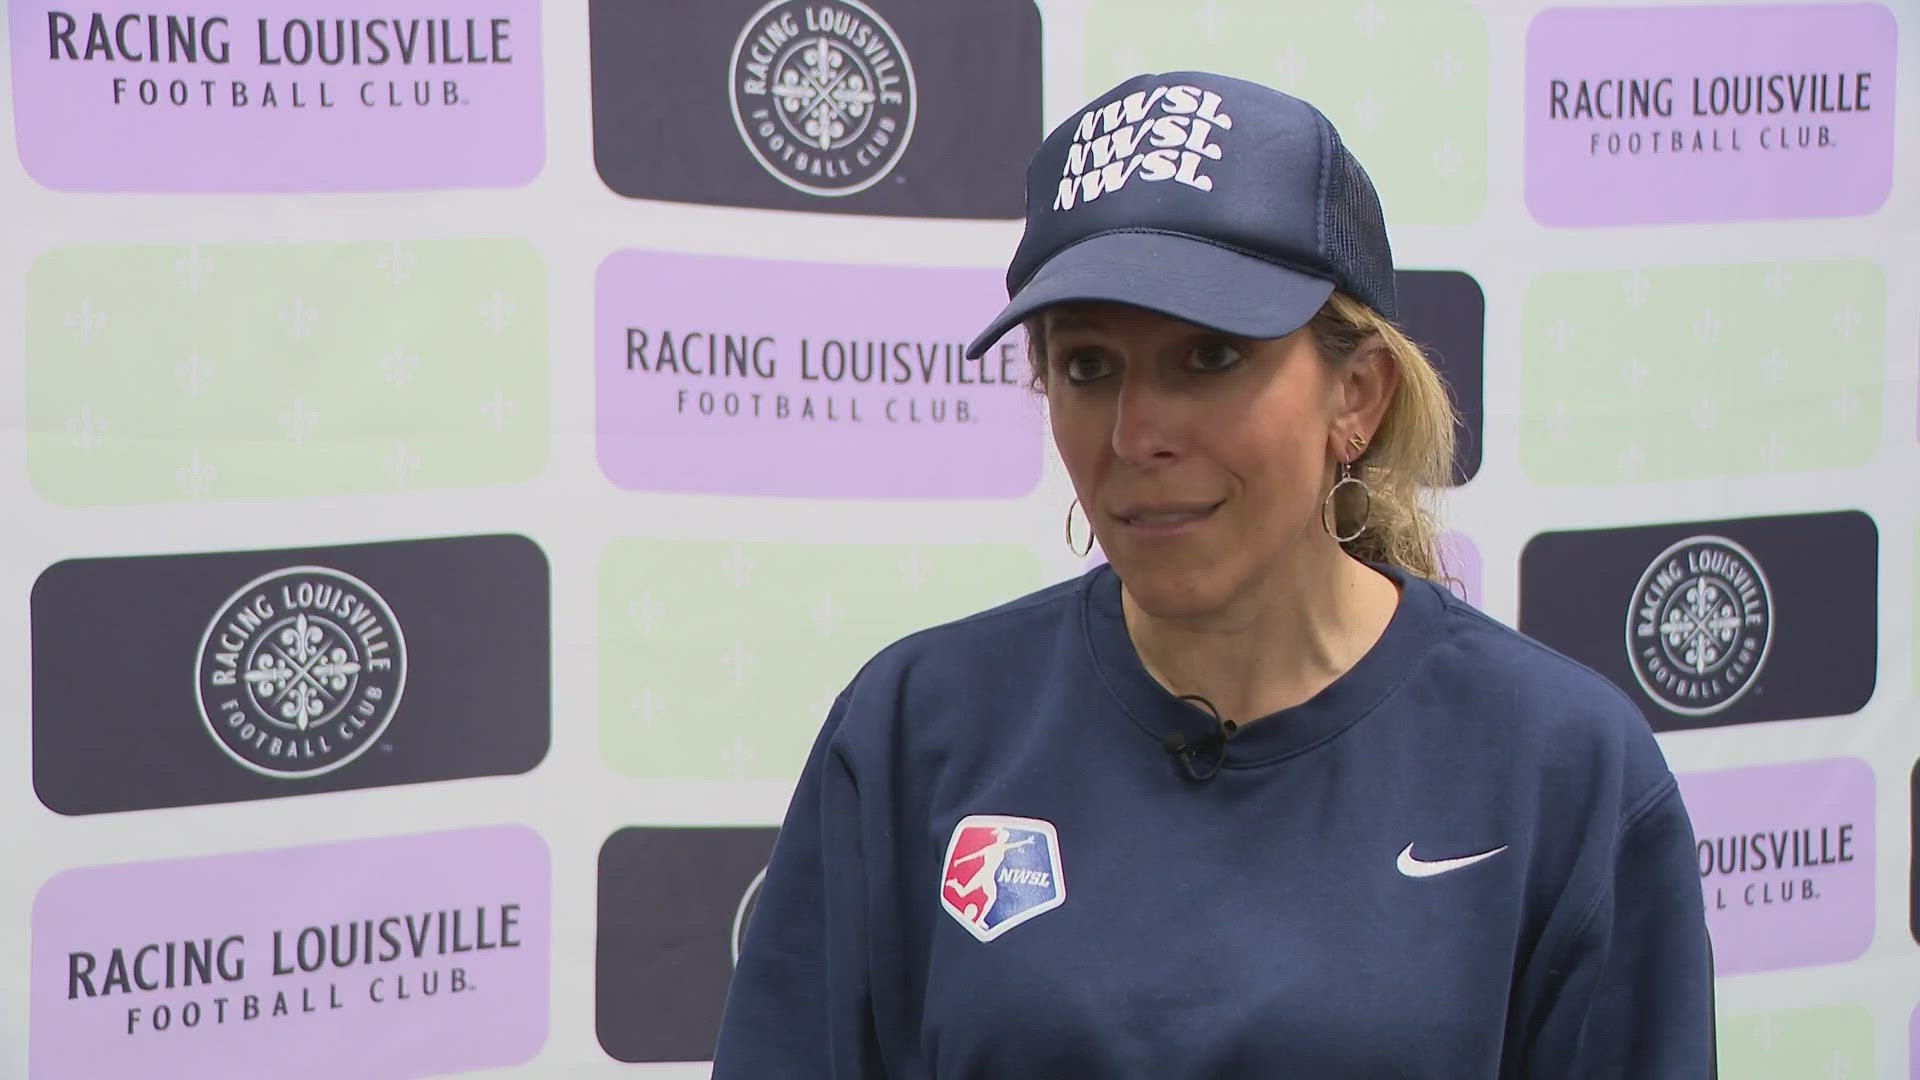 "[The theme I heard was] Louisville is the best-kept secret in the National Women's Soccer League," Jessica Berman said after speaking with players on Friday.